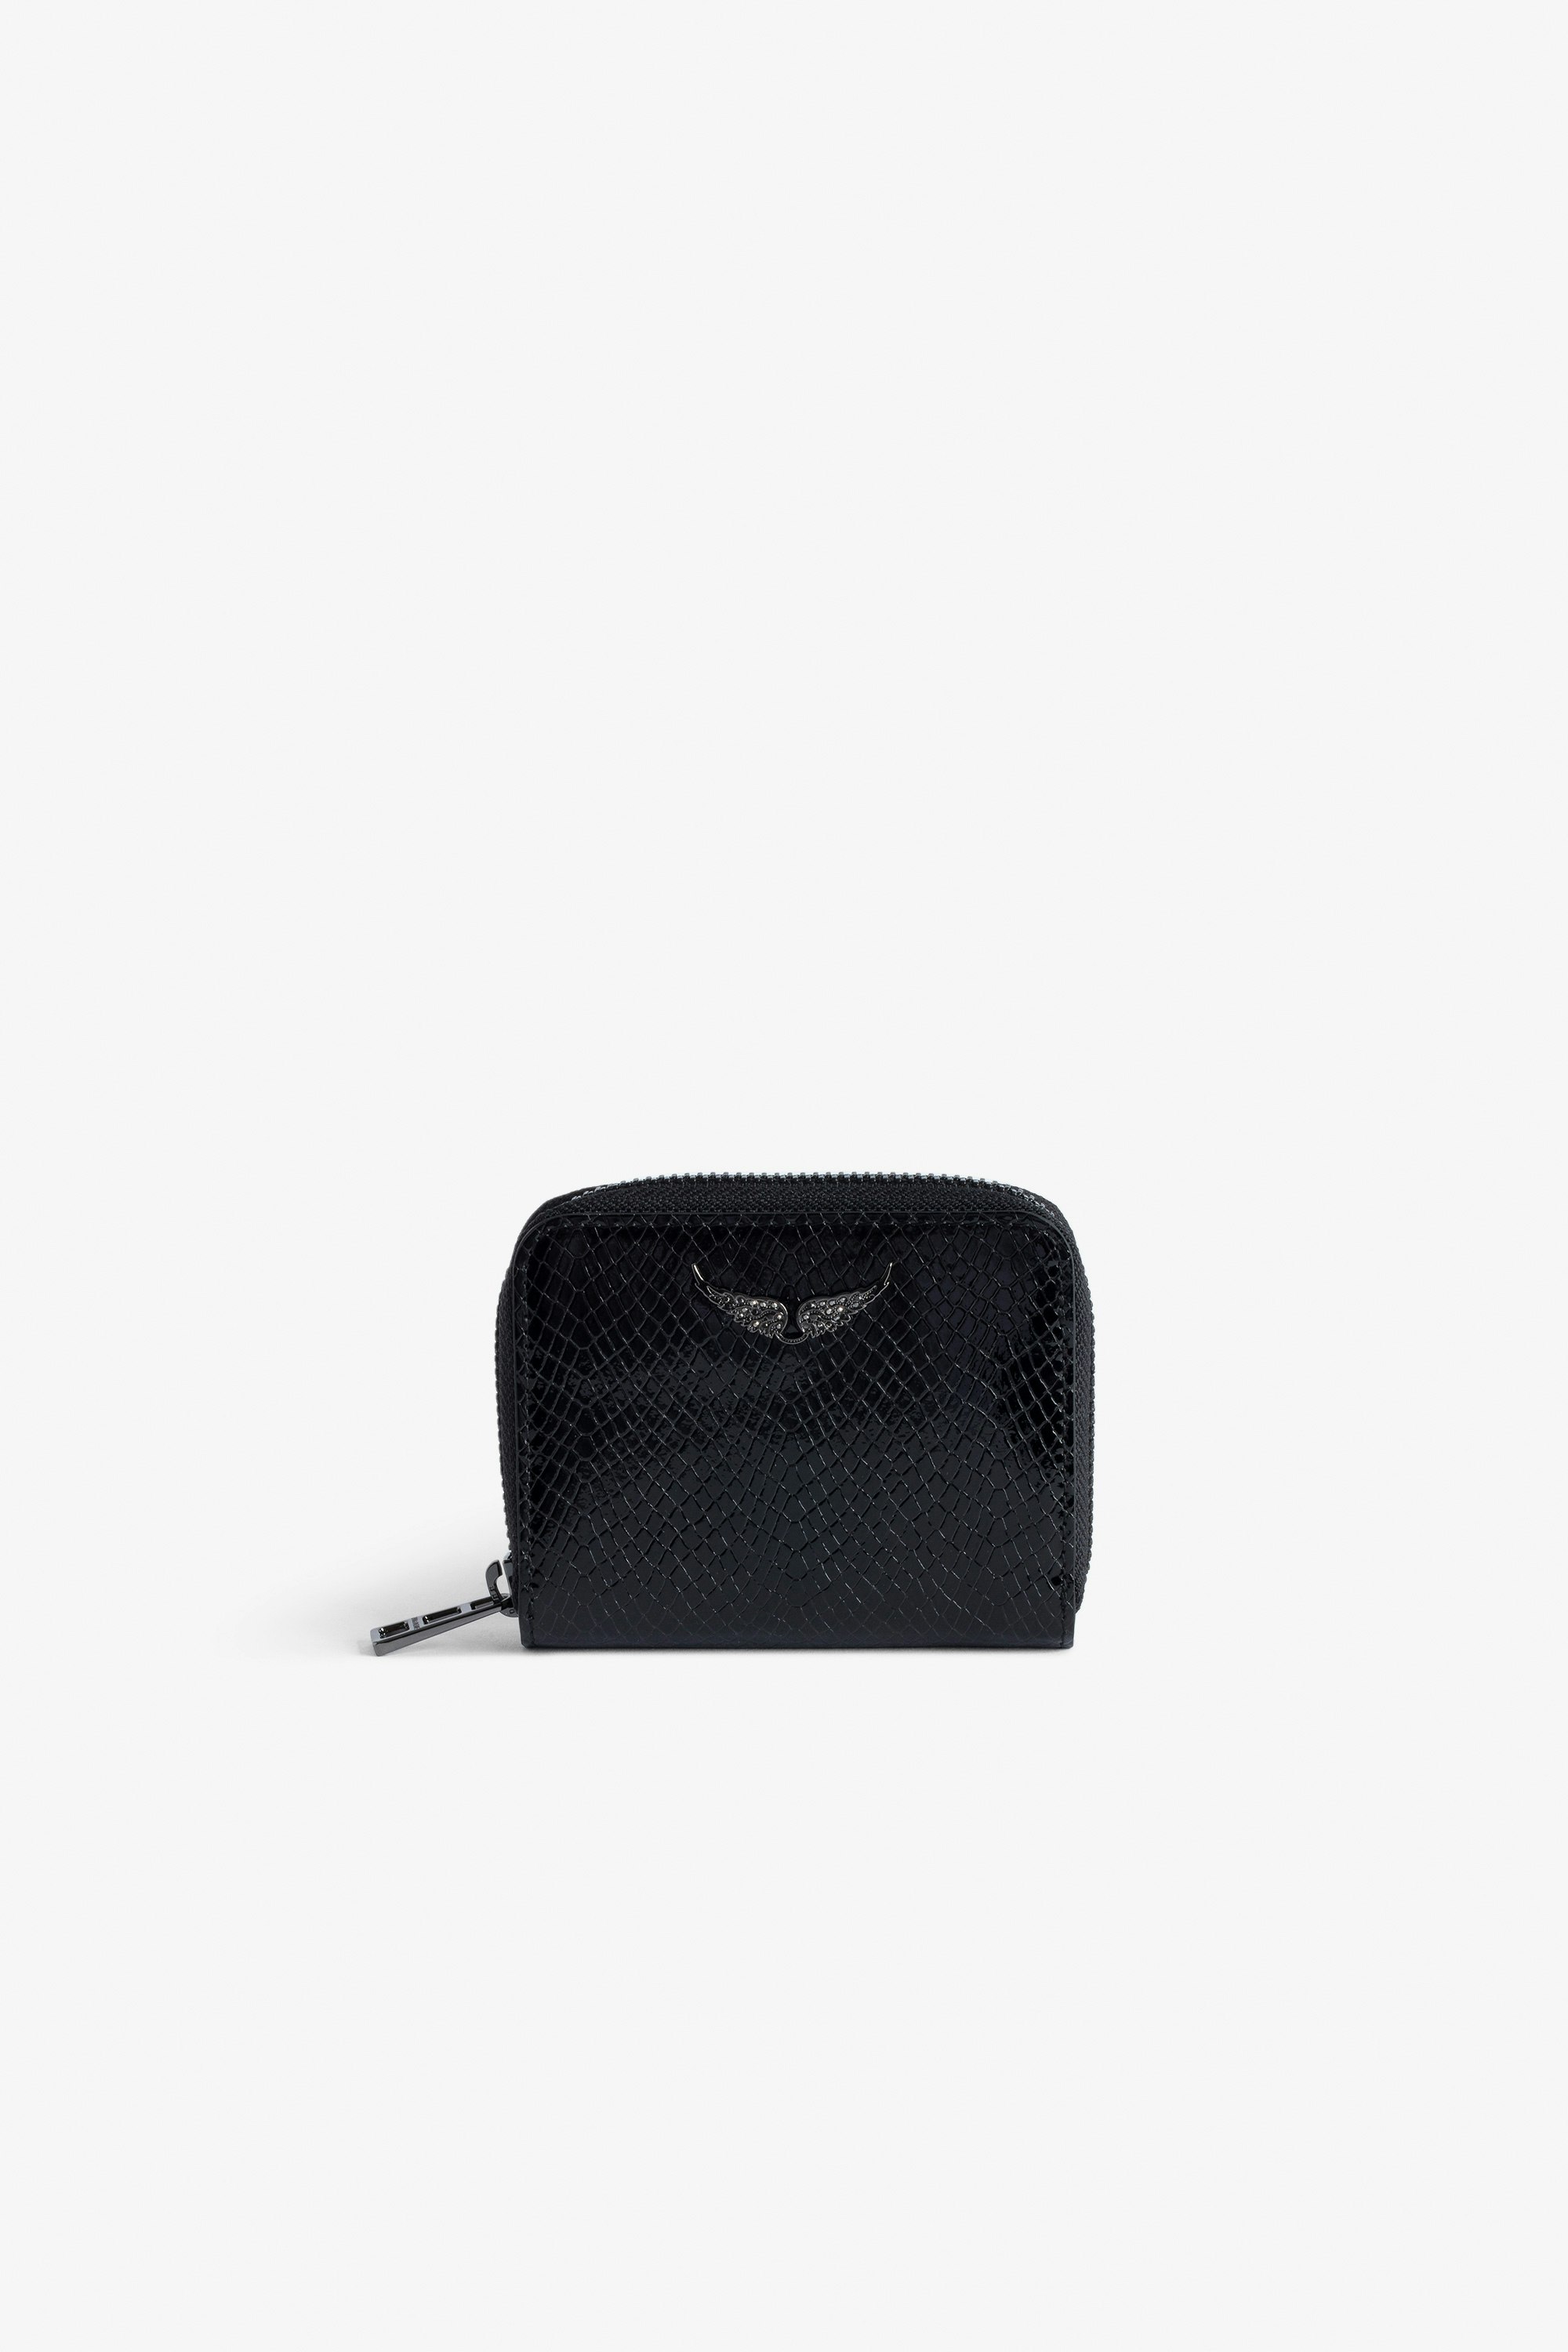 Mini ZV Glossy Wild Embossed Coin Purse - Women’s black python-effect patent leather wallet with diamanté wings charm.